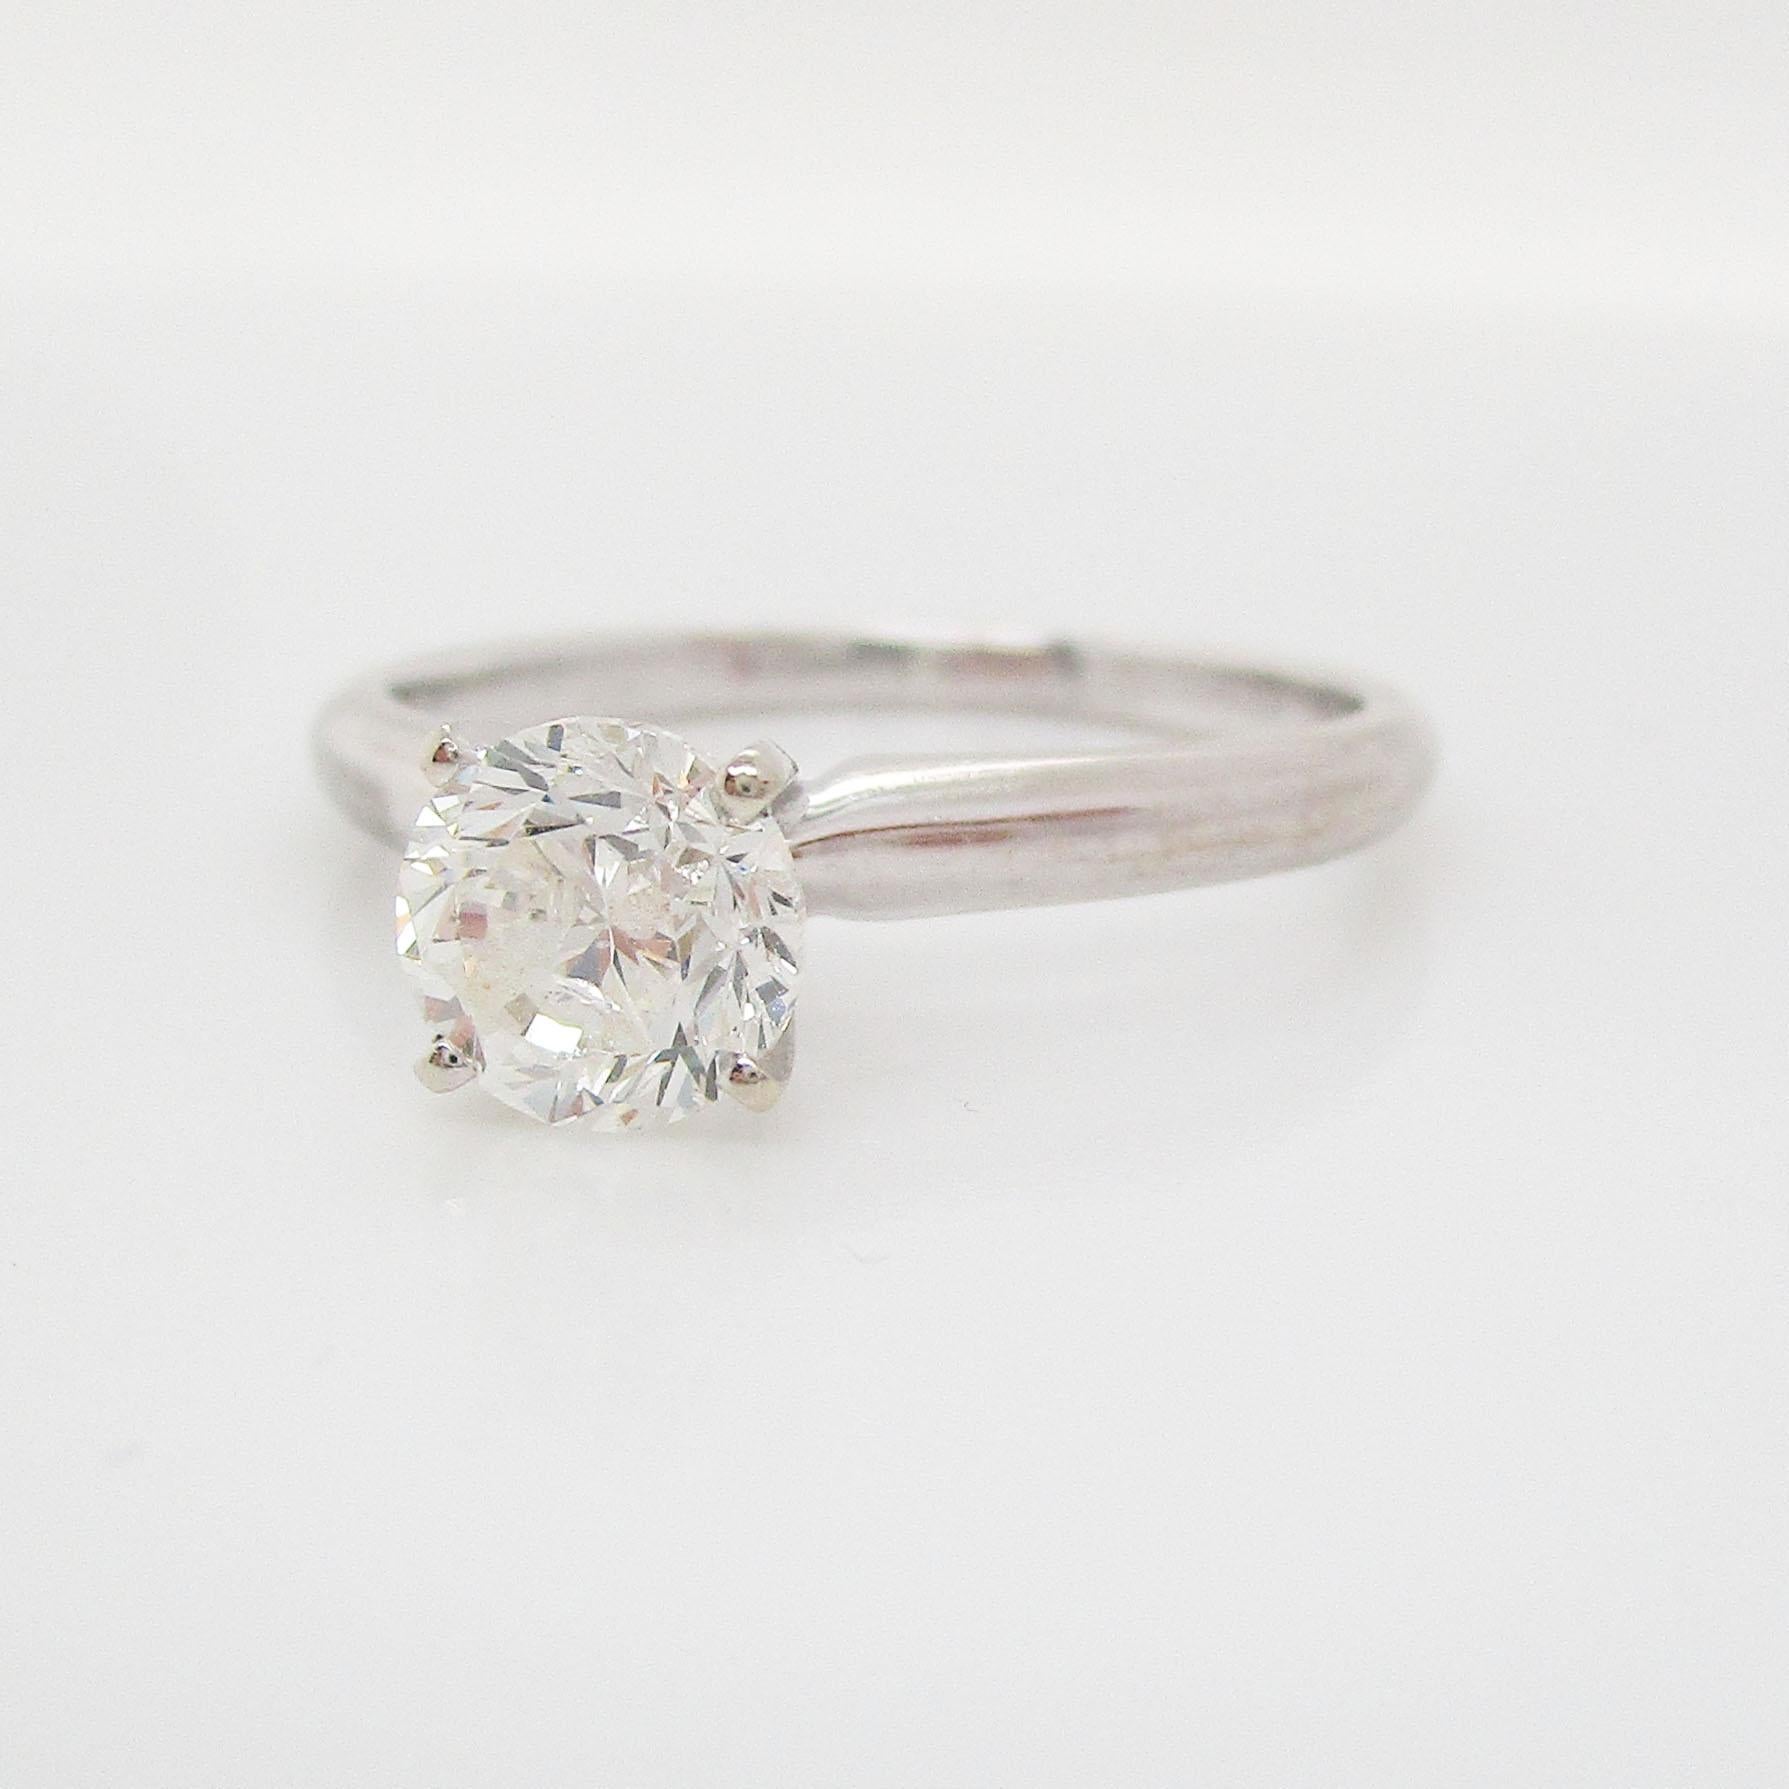 This is a beautiful diamond engagement ring in 14k white gold with a classic solitaire style. The four-prong setting is slightly raised, lifting the gorgeous round diamond. The white gold paired with the round diamond makes for a timeless, classic